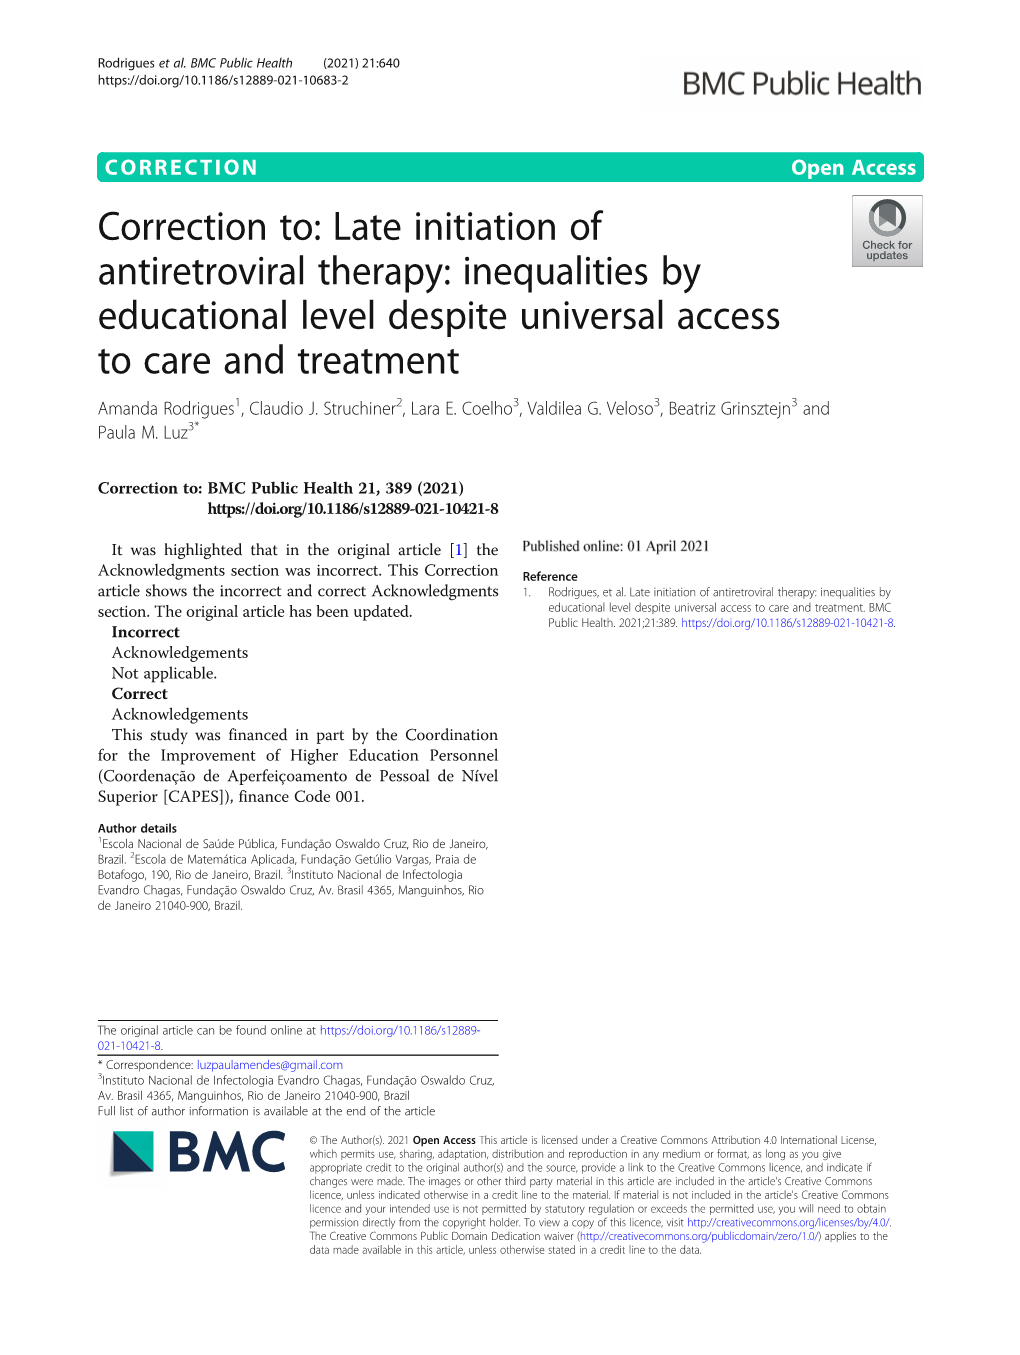 Late Initiation of Antiretroviral Therapy: Inequalities by Educational Level Despite Universal Access to Care and Treatment Amanda Rodrigues1, Claudio J